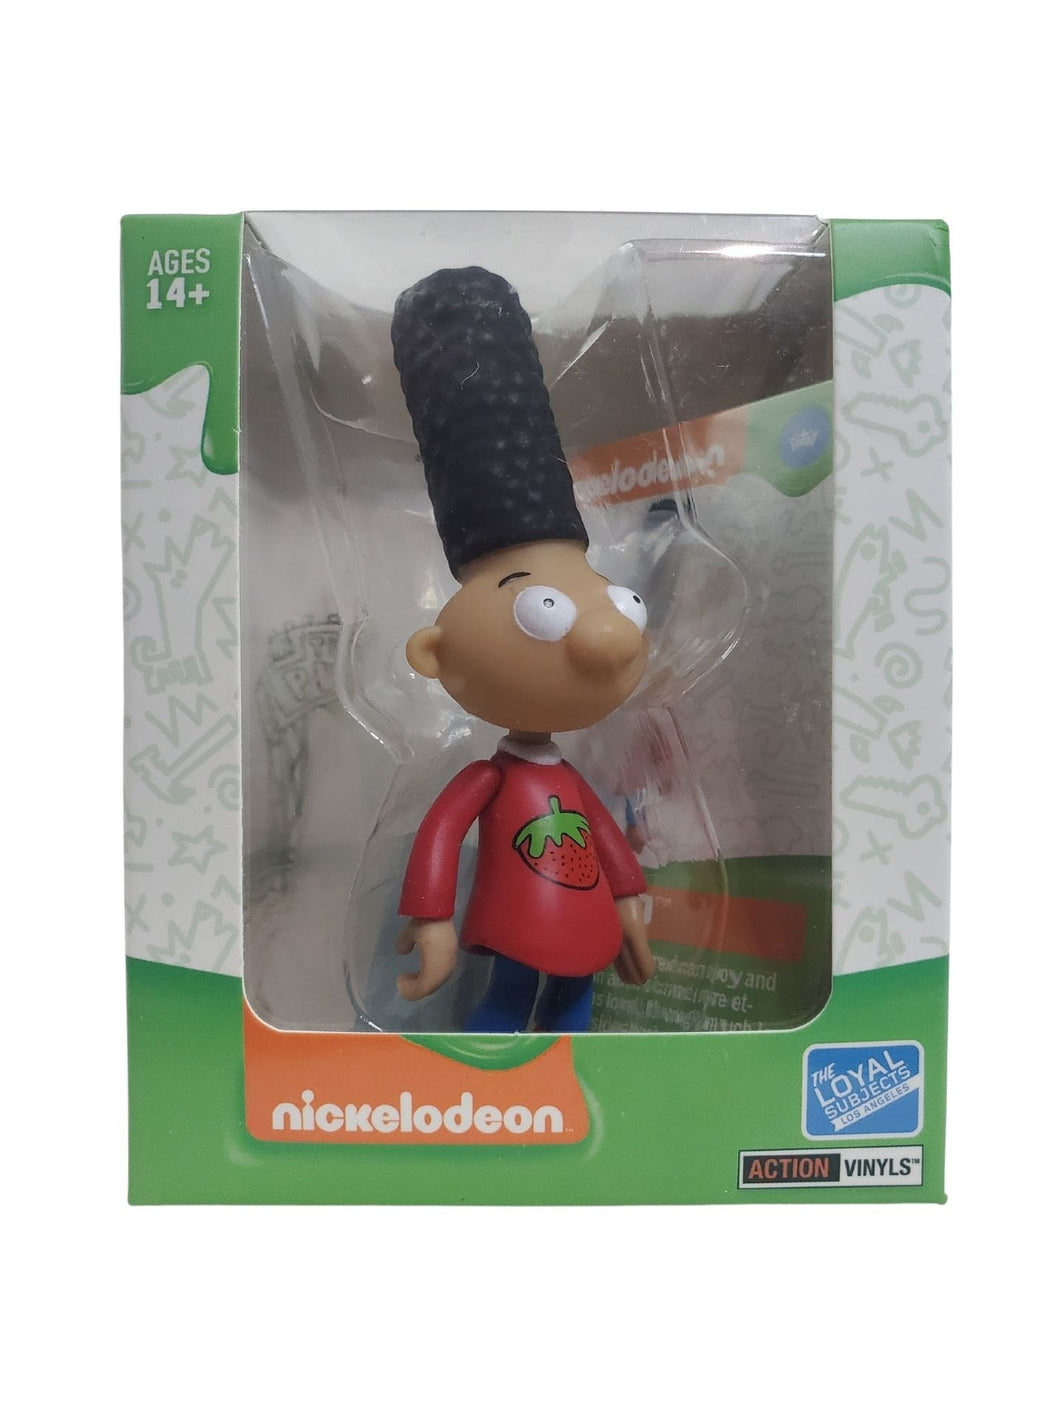 Loyal Subjects Nickelodeon Gerald Posable Action Vinyl